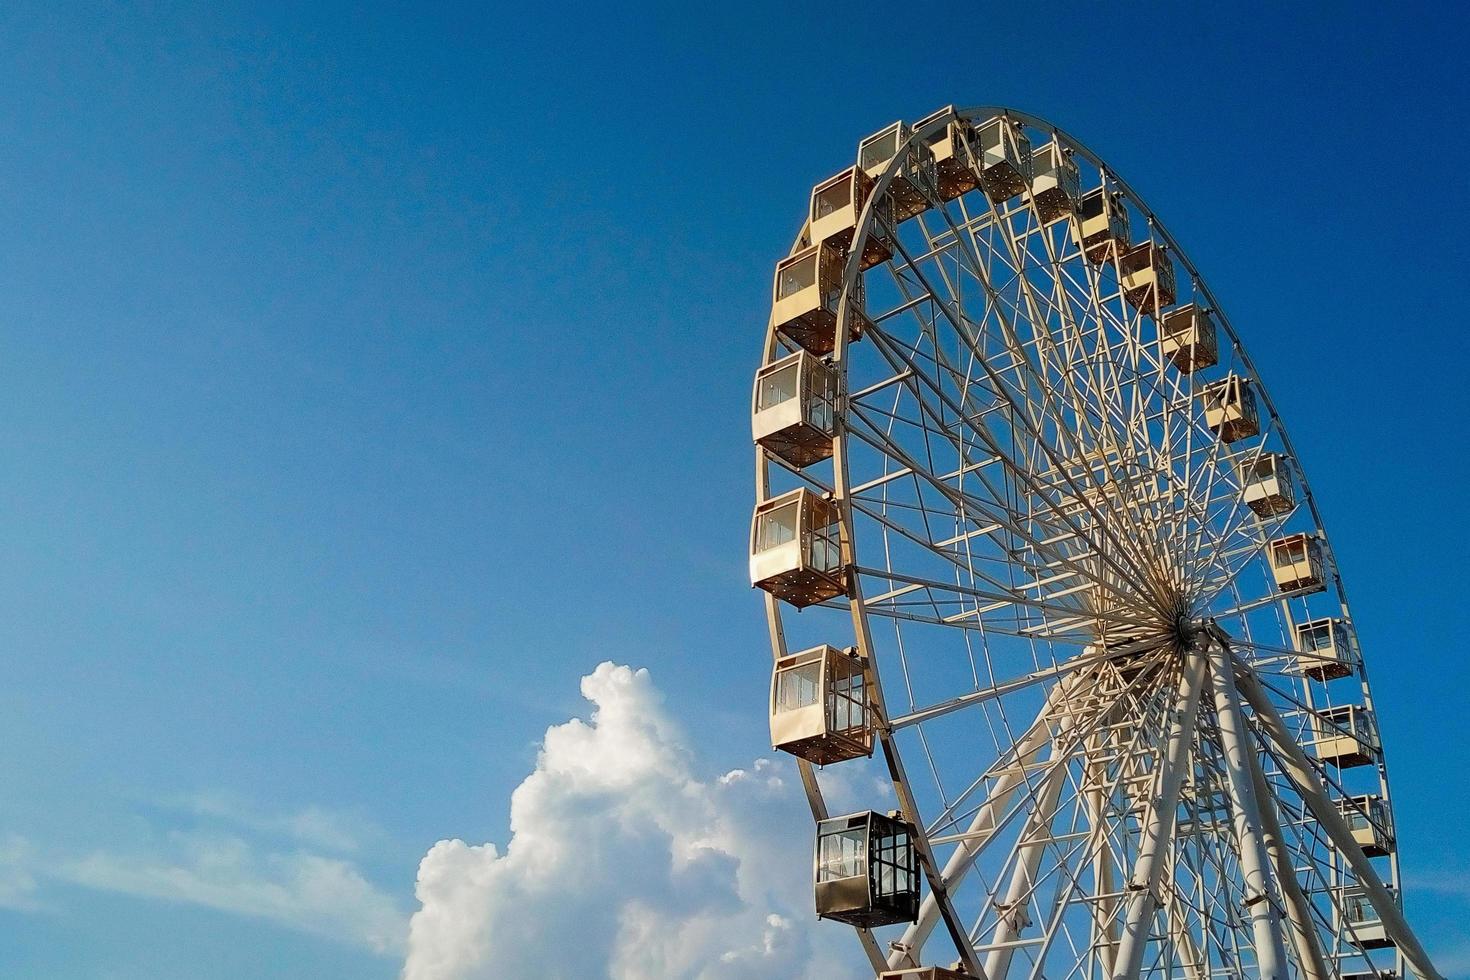 observation wheel against beautiful blue sky with clouds photo